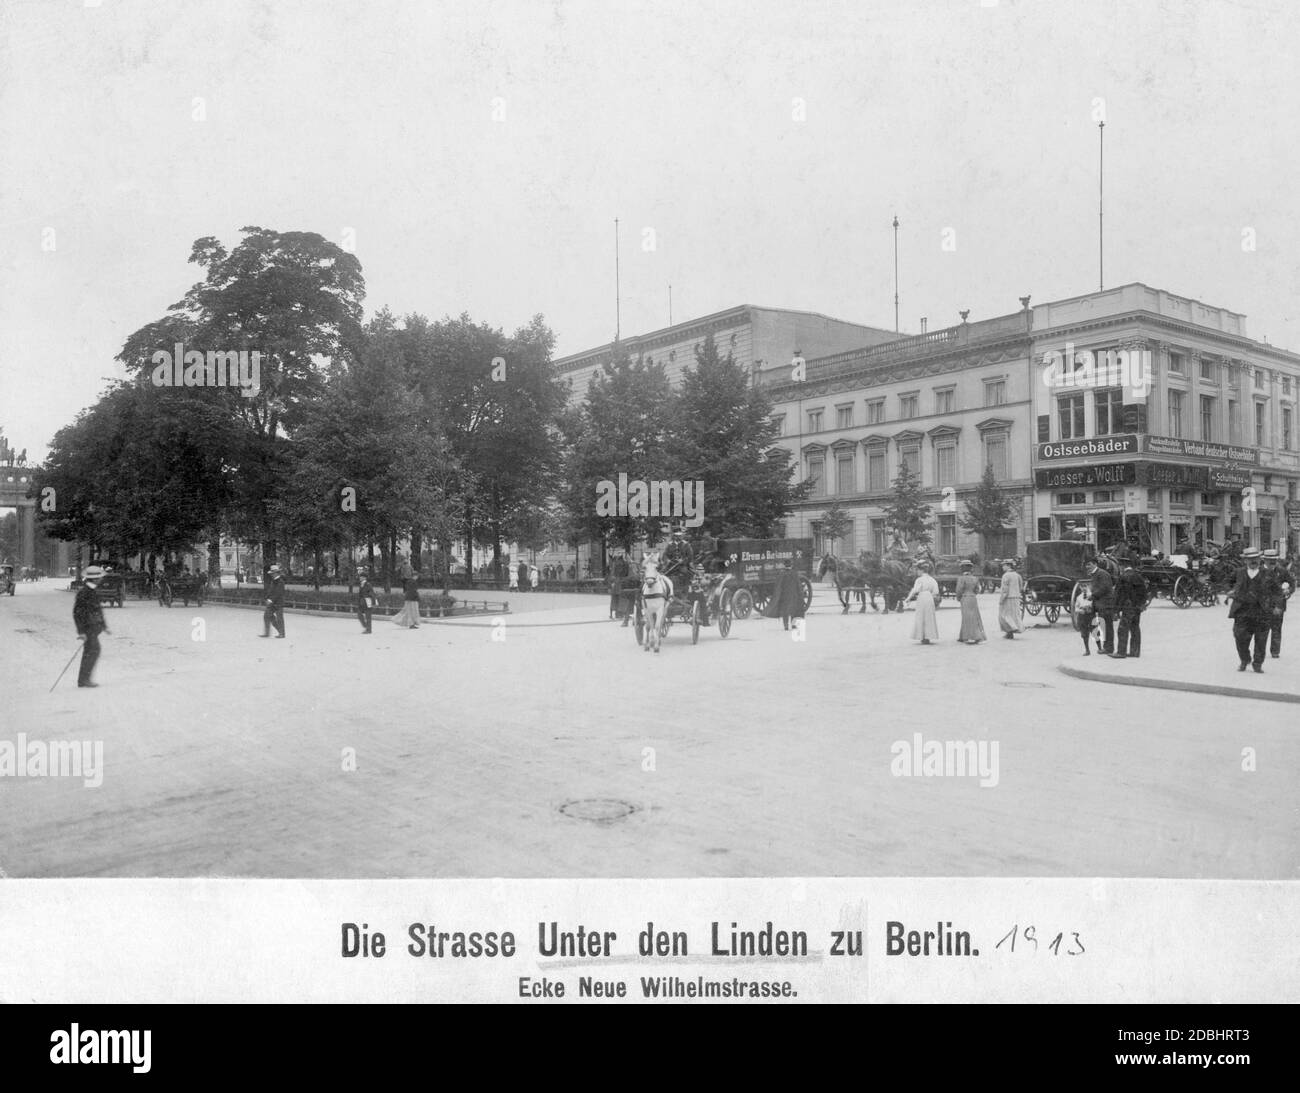 'In the picture a coal truck of the company Efrem & Bicknase is driving on the street Unter den Linden, corner Wilhelmstrasse, through Berlin. On the right are the stores of Schultheissen Reinhold Jacksch, the tobacconist Loeser & Wolff and above them the information center and brochure edition of the Verband deutscher Ostseebaeder (''Association of German Baltic Sea Resorts''). On the left in the background is the Brandenburg Gate. The picture was taken in 1913.' Stock Photo